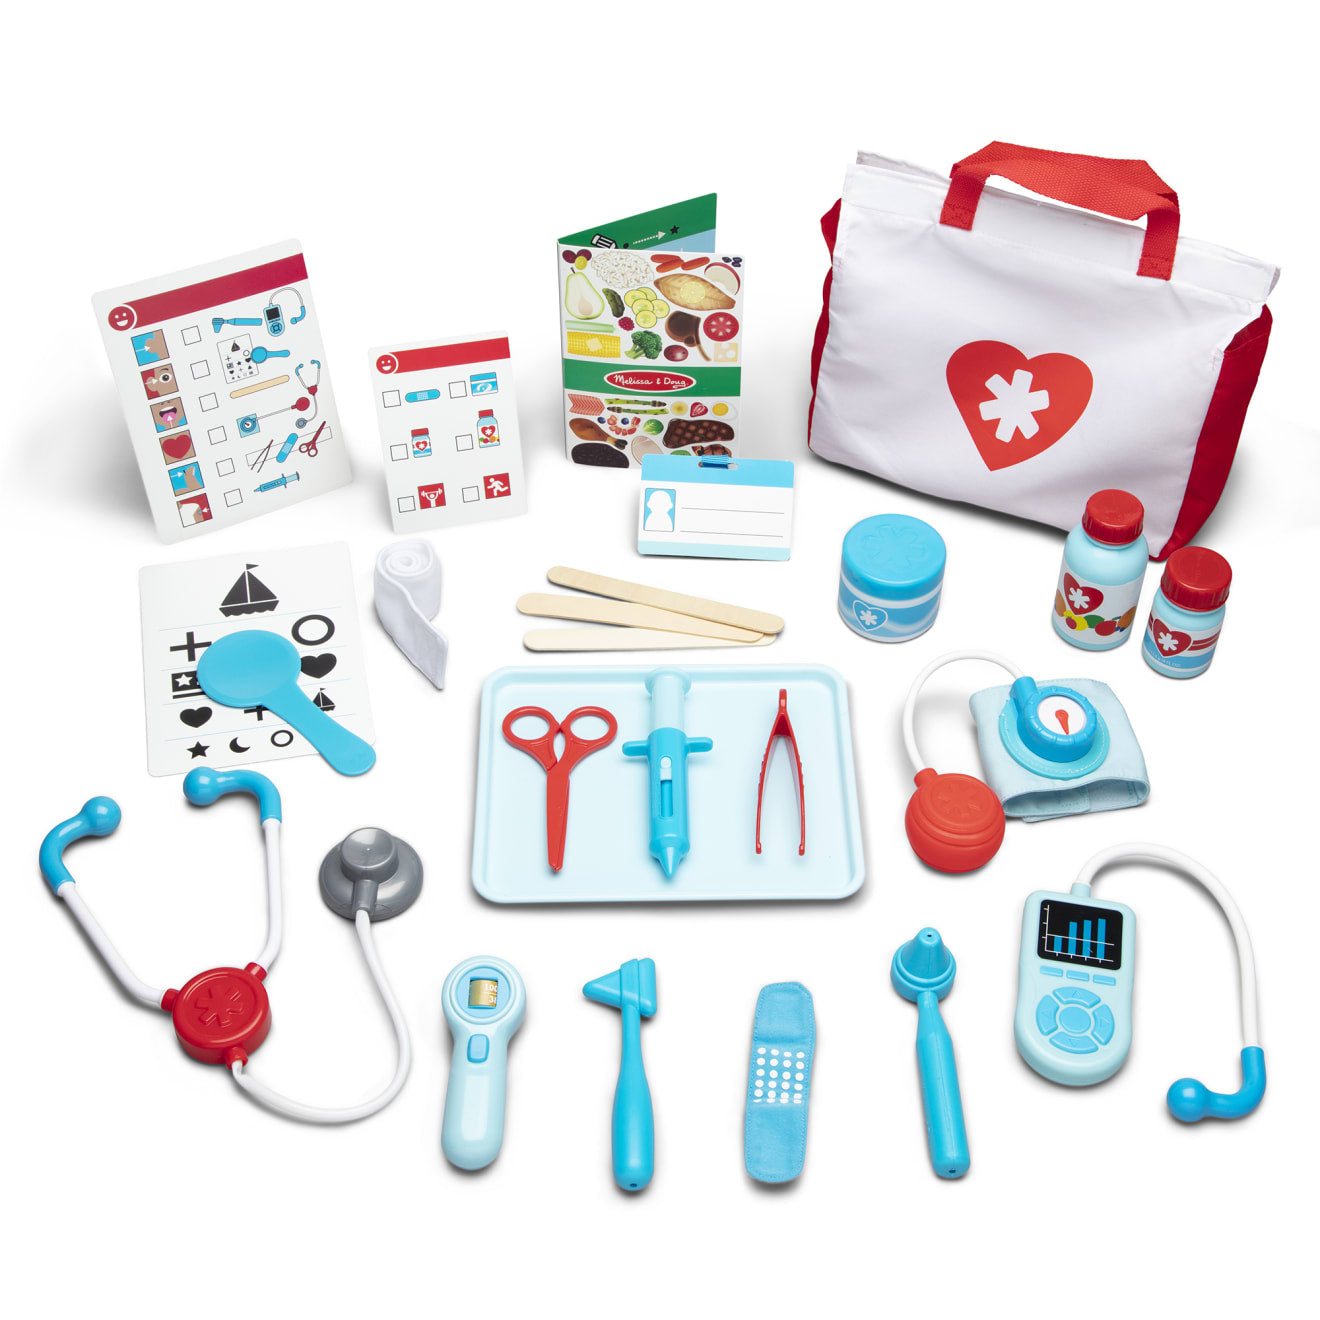 https://cdn.shopify.com/s/files/1/0550/8487/5830/products/Get-Well-Doctor-s-Kit-Play-Set-008569-1-Pieces-Out.jpg?v=1666635216